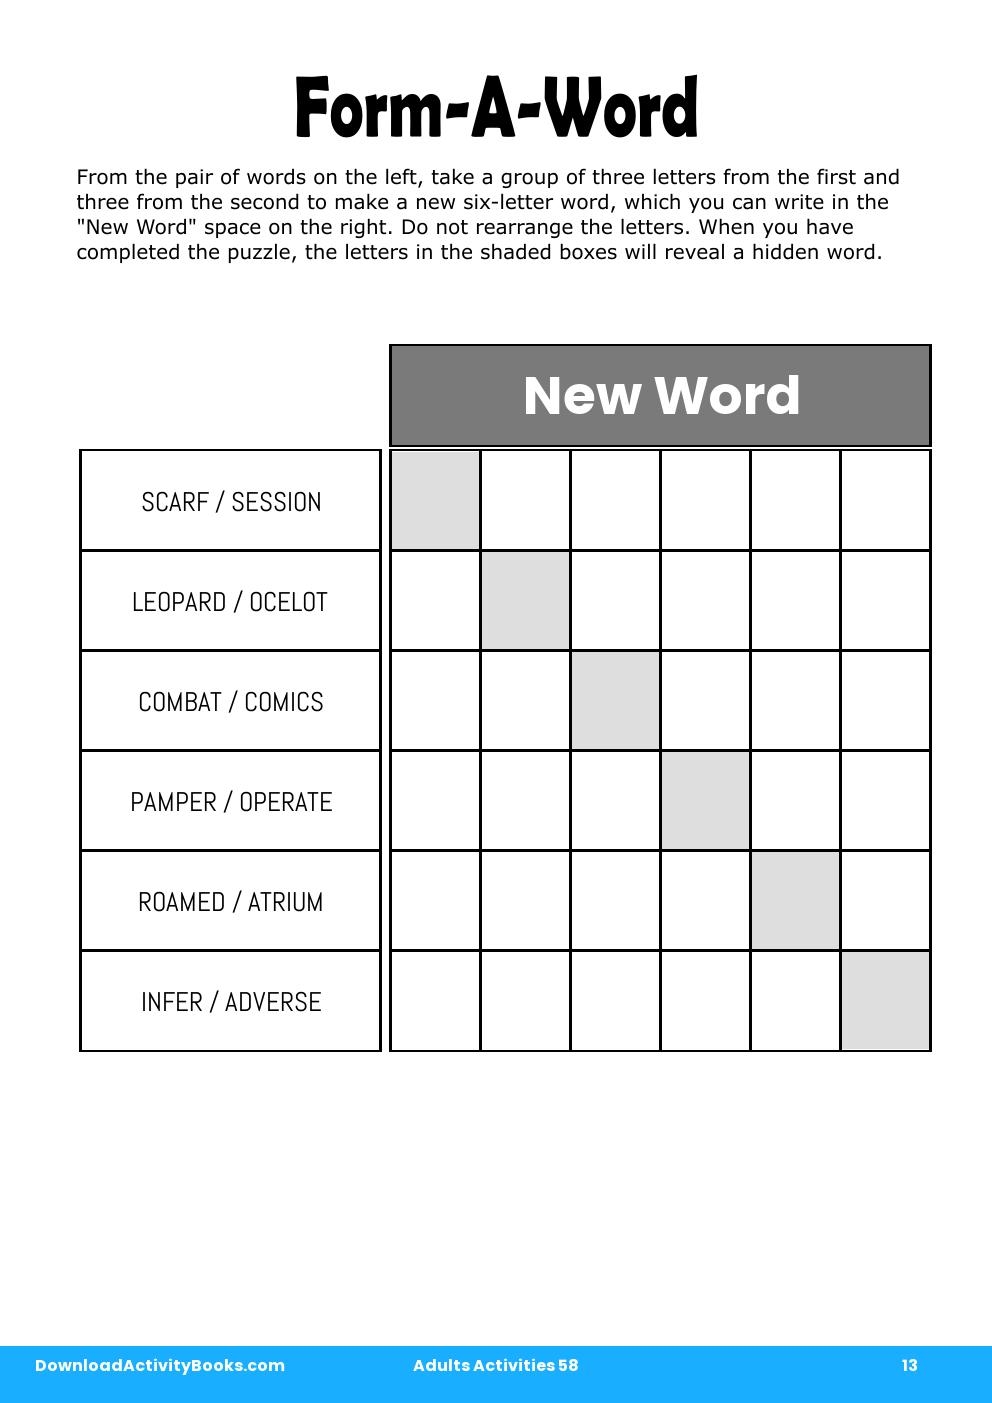 Form-A-Word in Adults Activities 58